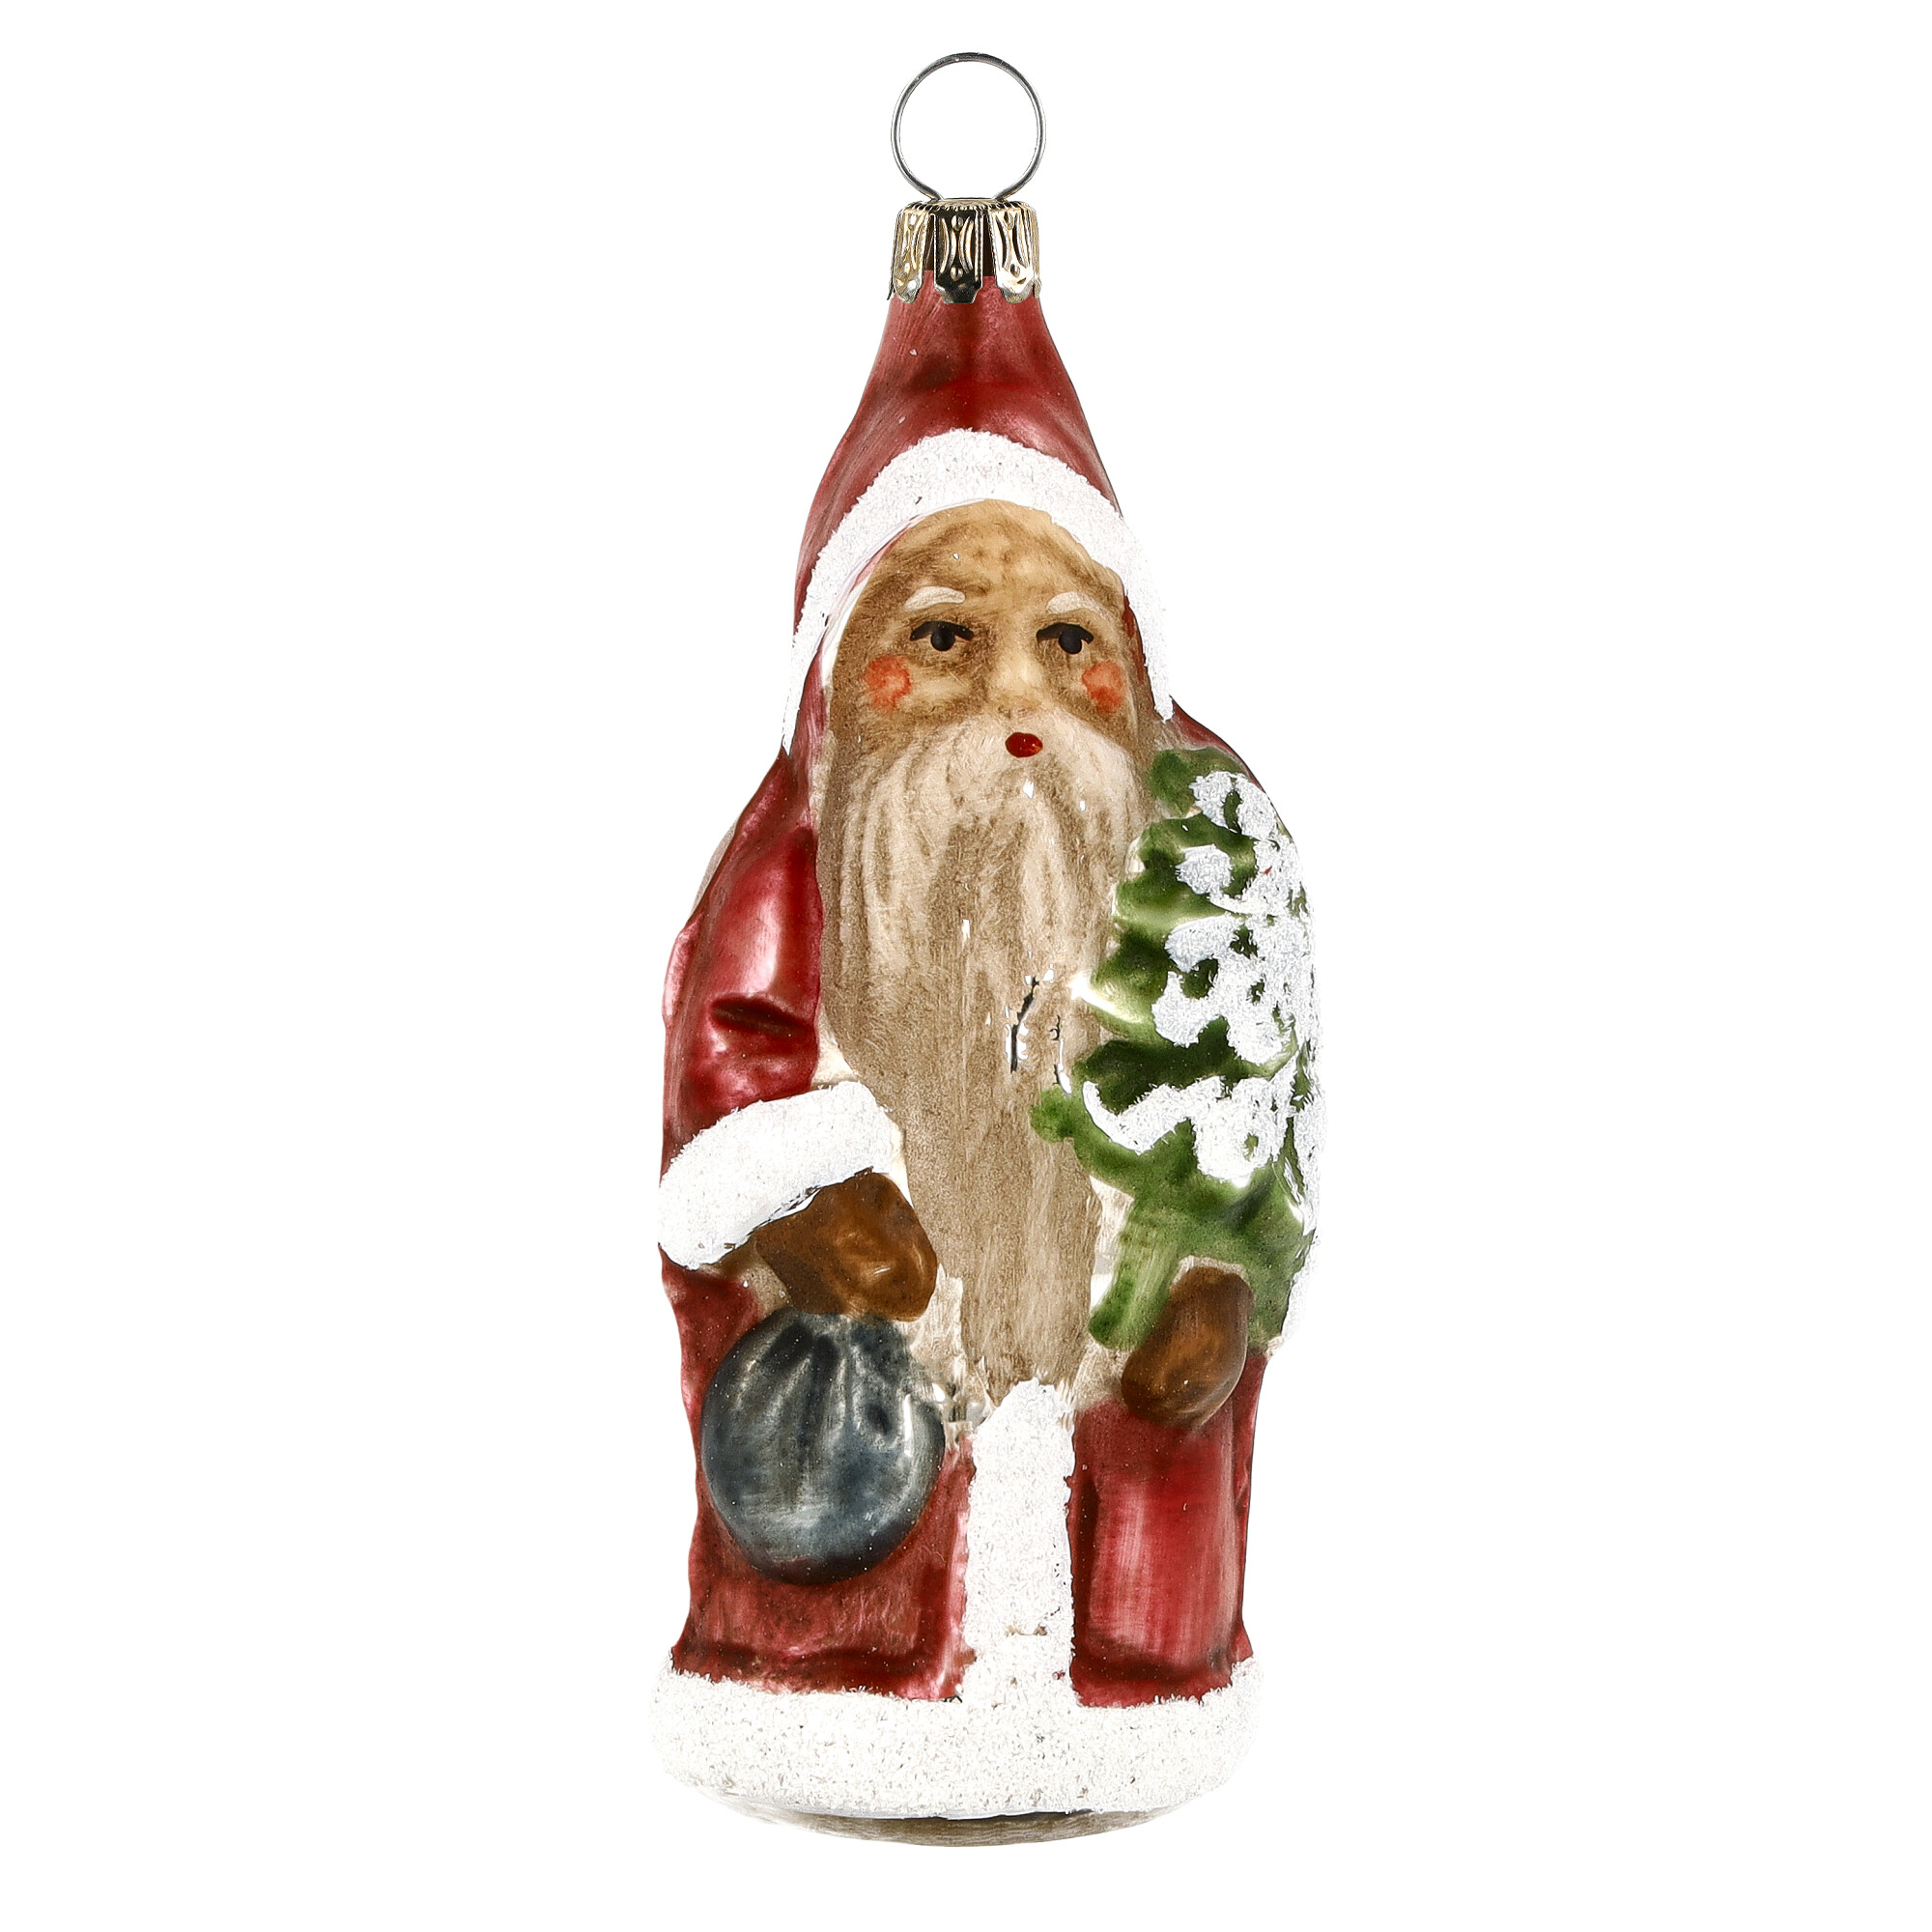 Retro Vintage style Christmas Glass Ornament - Little Santa Claus with backpack and tree